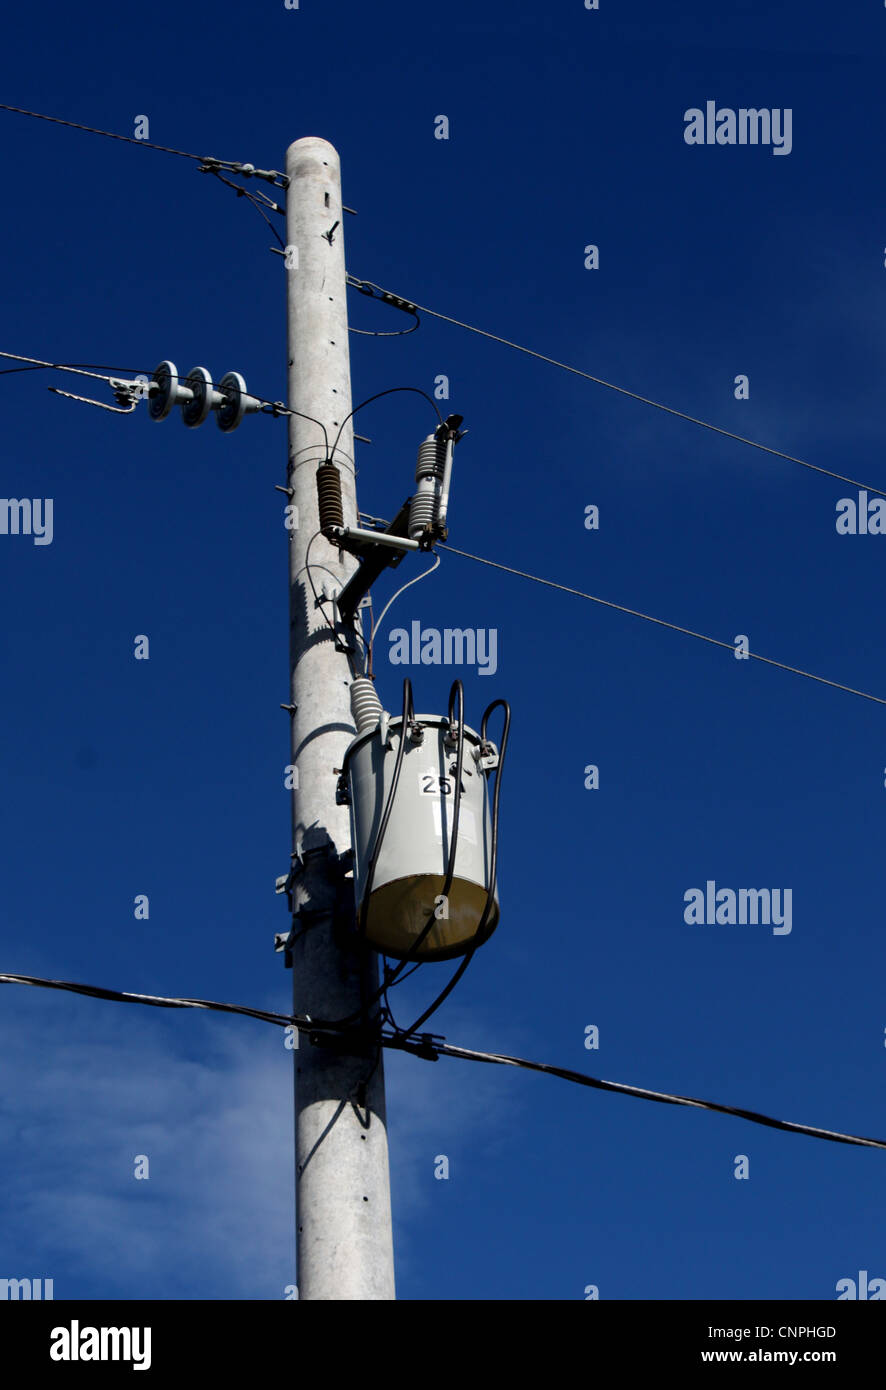 A single electric power transformer against a clear blue sky. Stock Photo